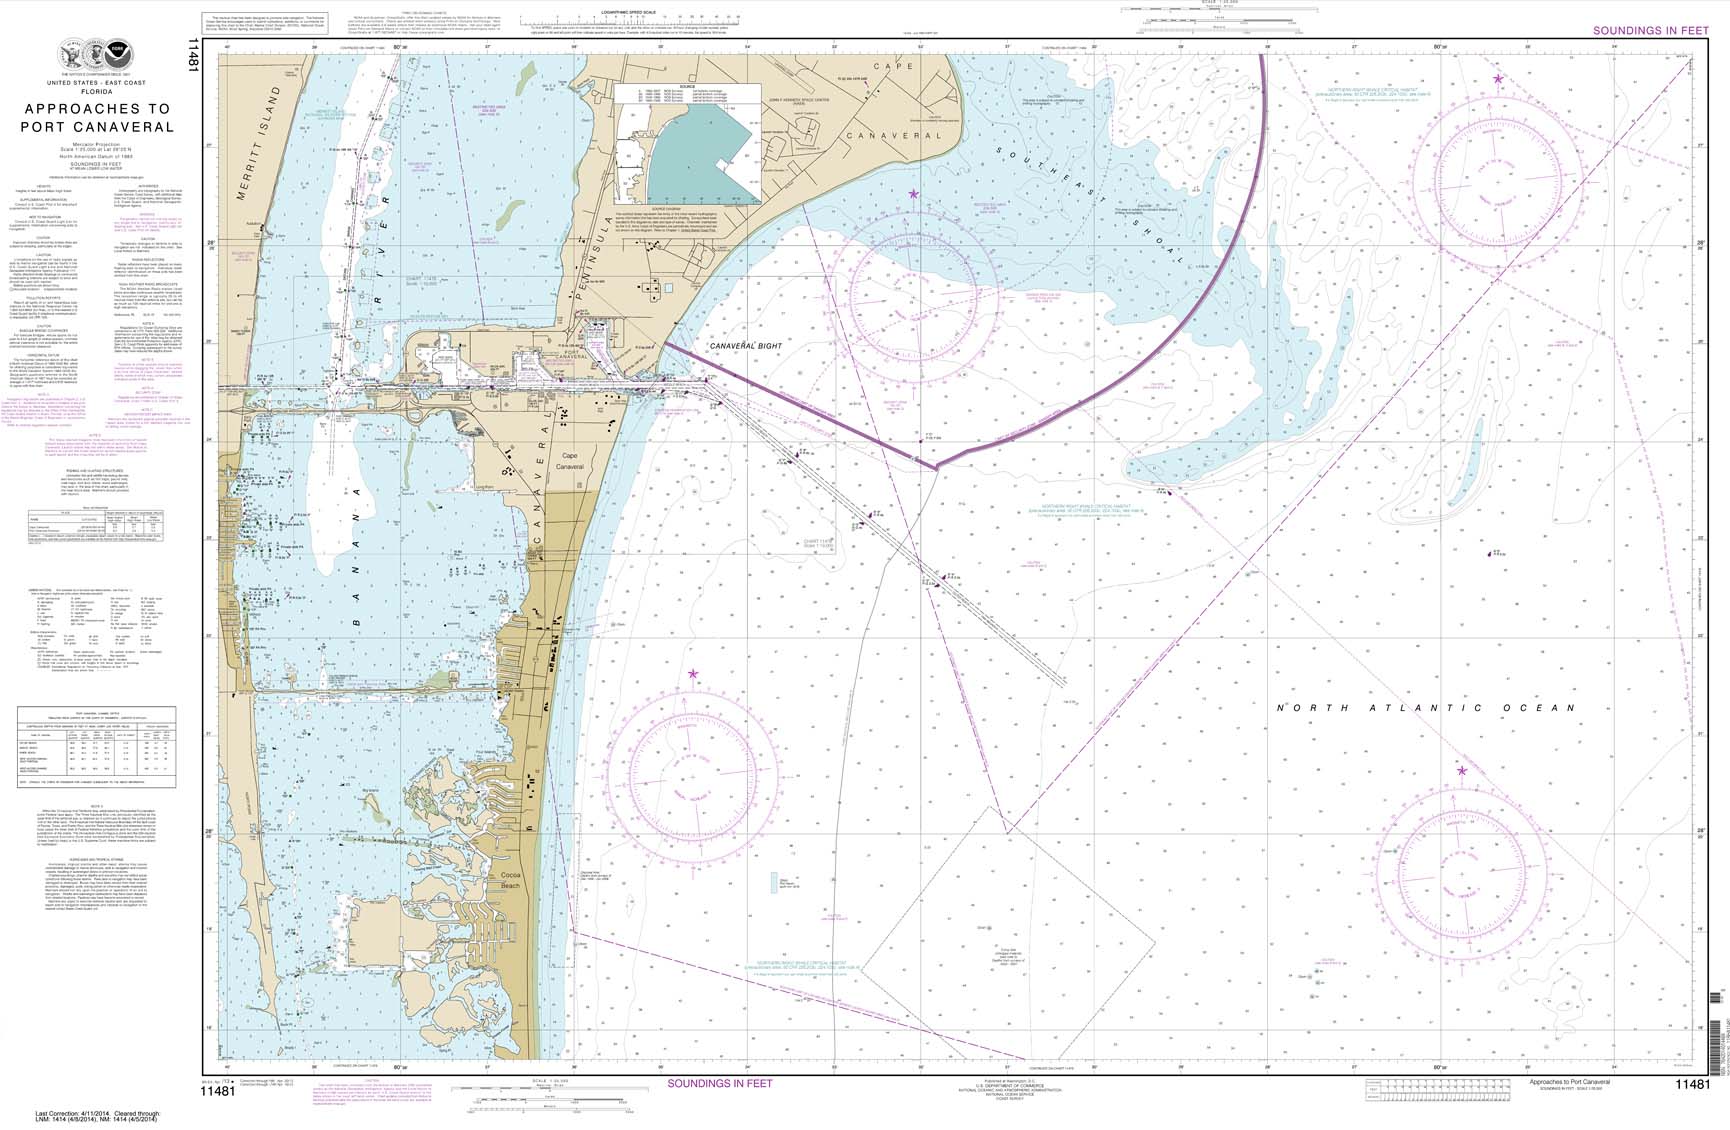 Approaches to Port Canaveral